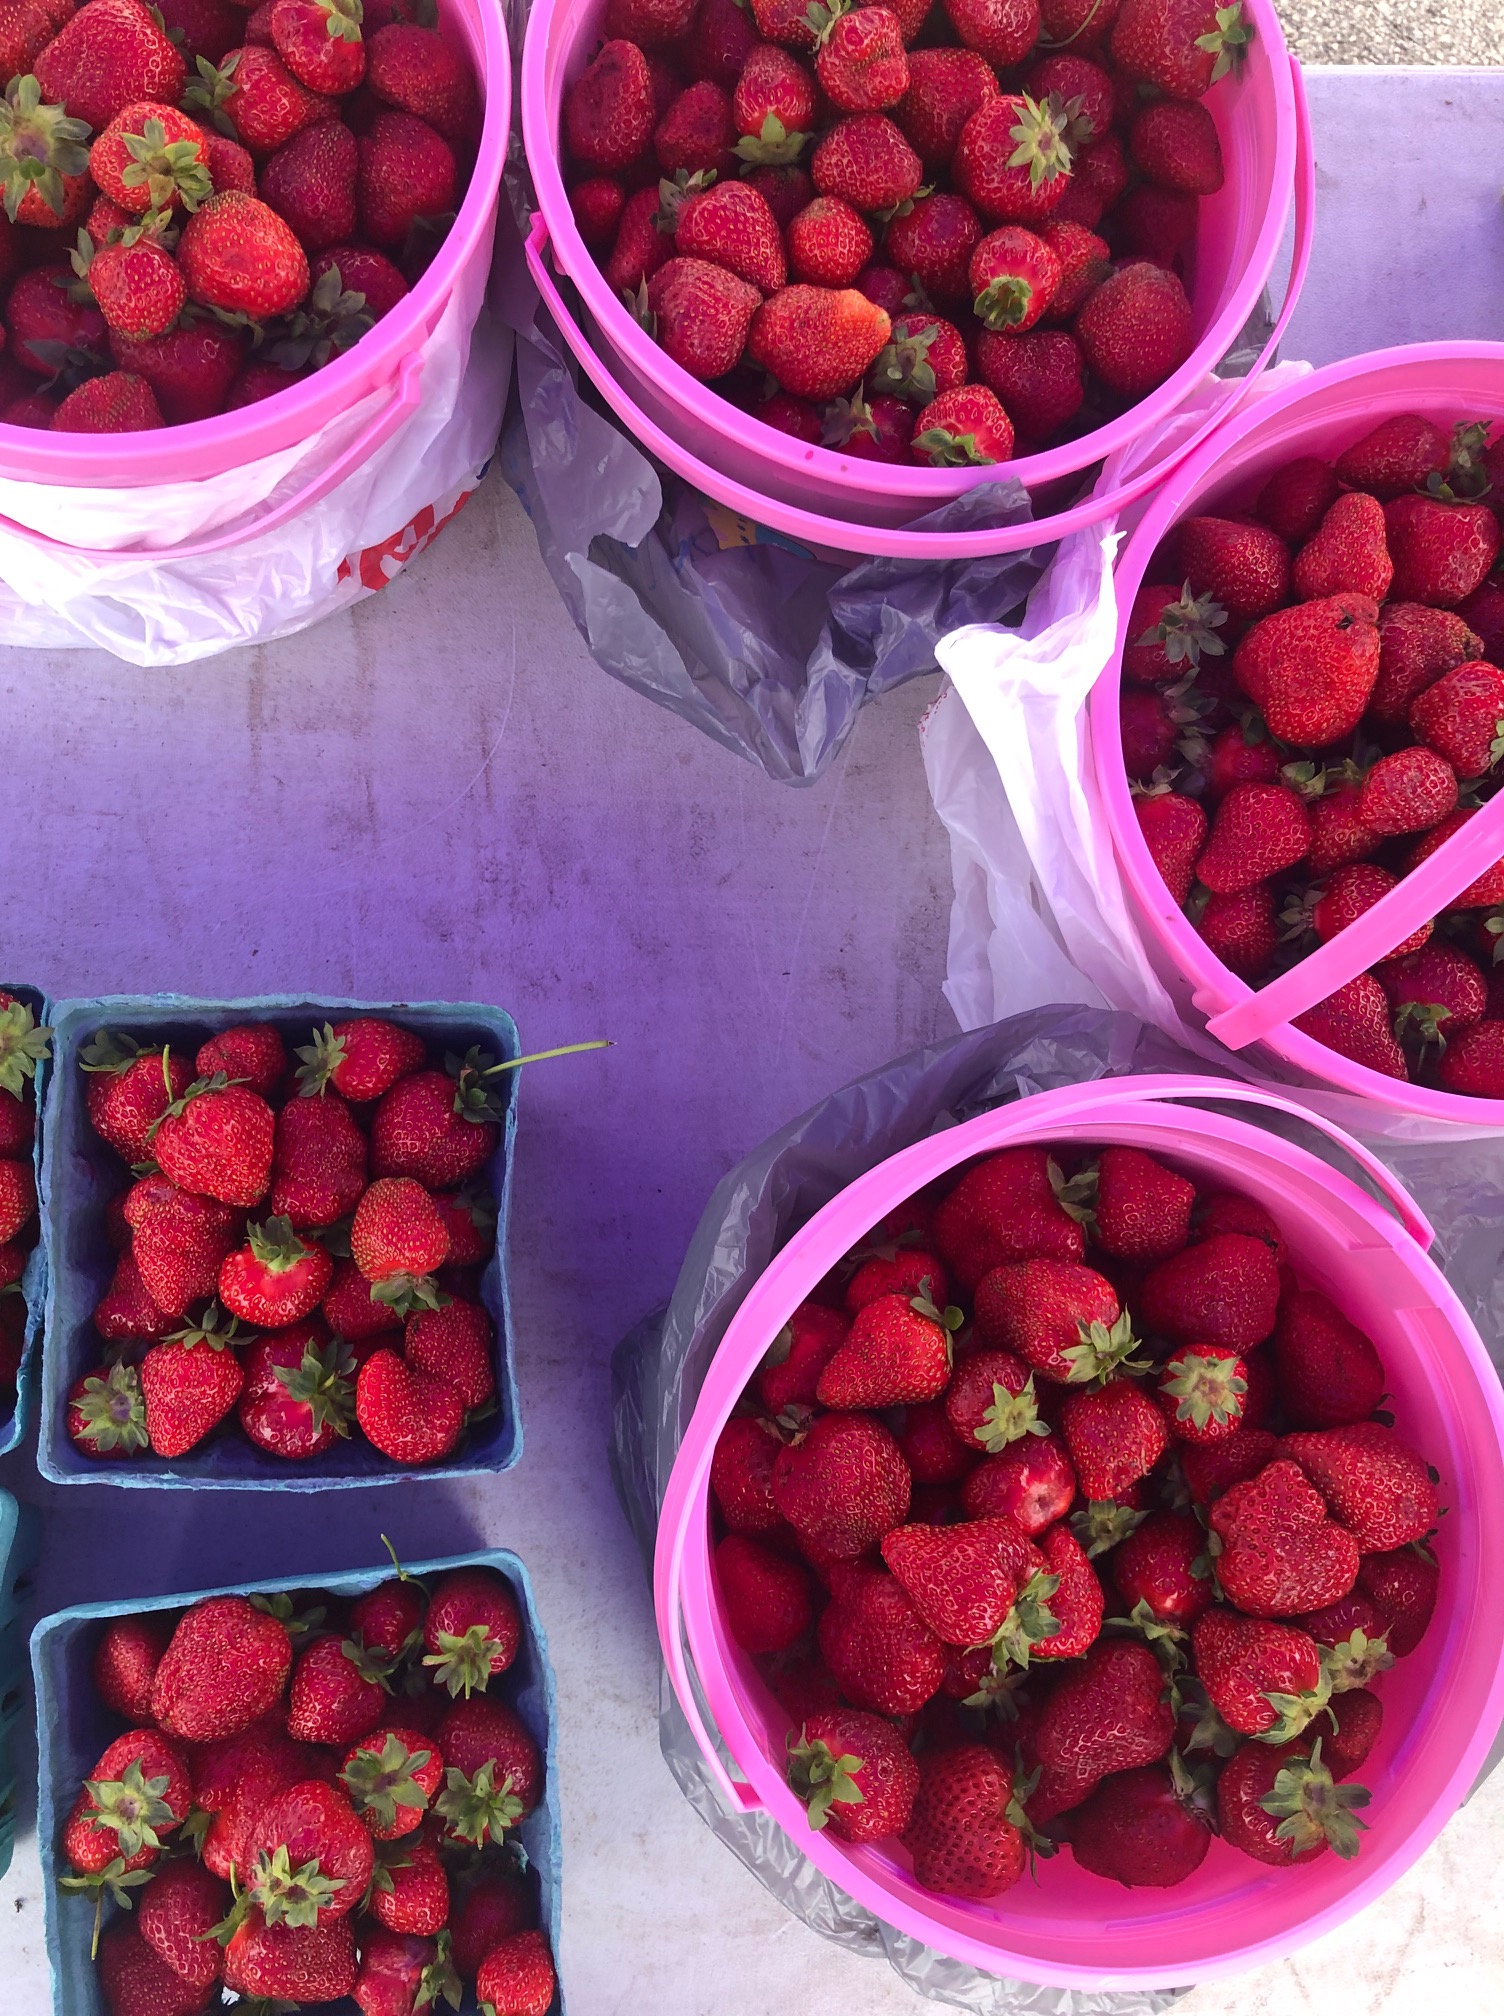 An overhead photo shows giant buckets of Illinois-grown strawberries beside a few small blue square containers of strawberries for sale.  Photo by Alyssa Buckley.